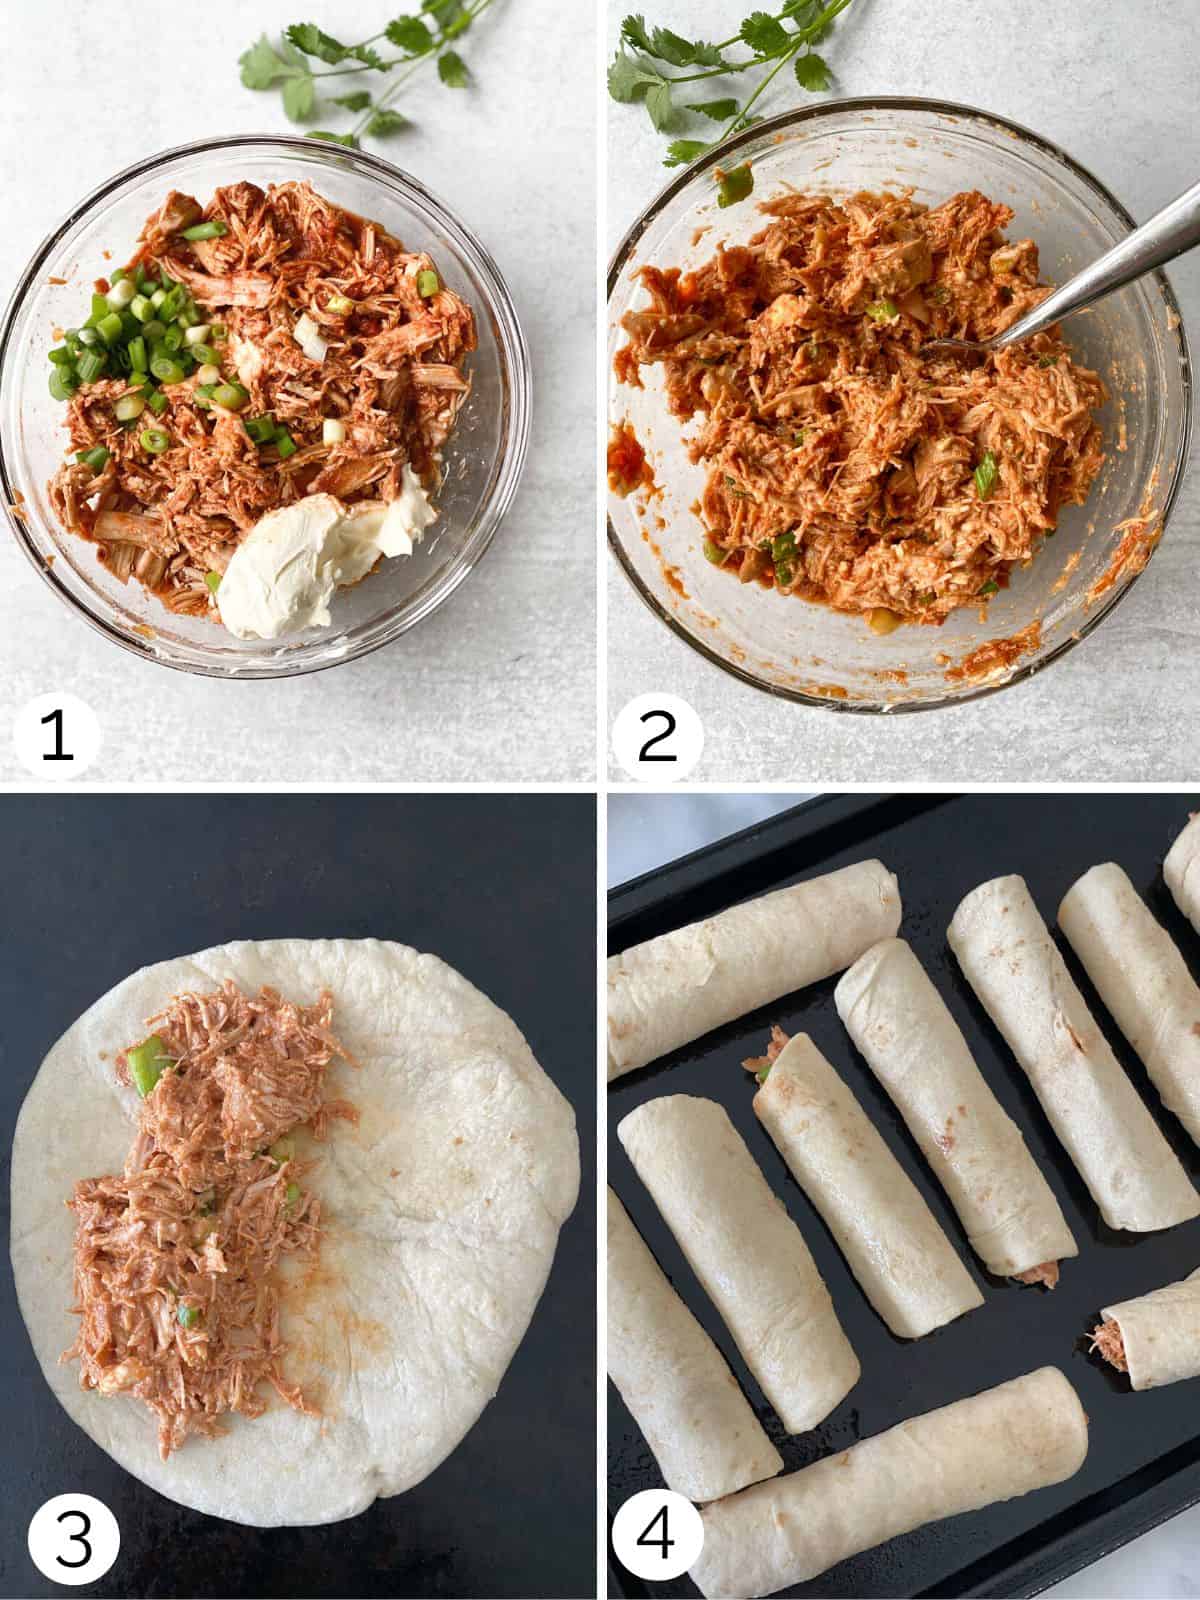 Process of mixing creamy chicken tinga and rolling into tortillas.